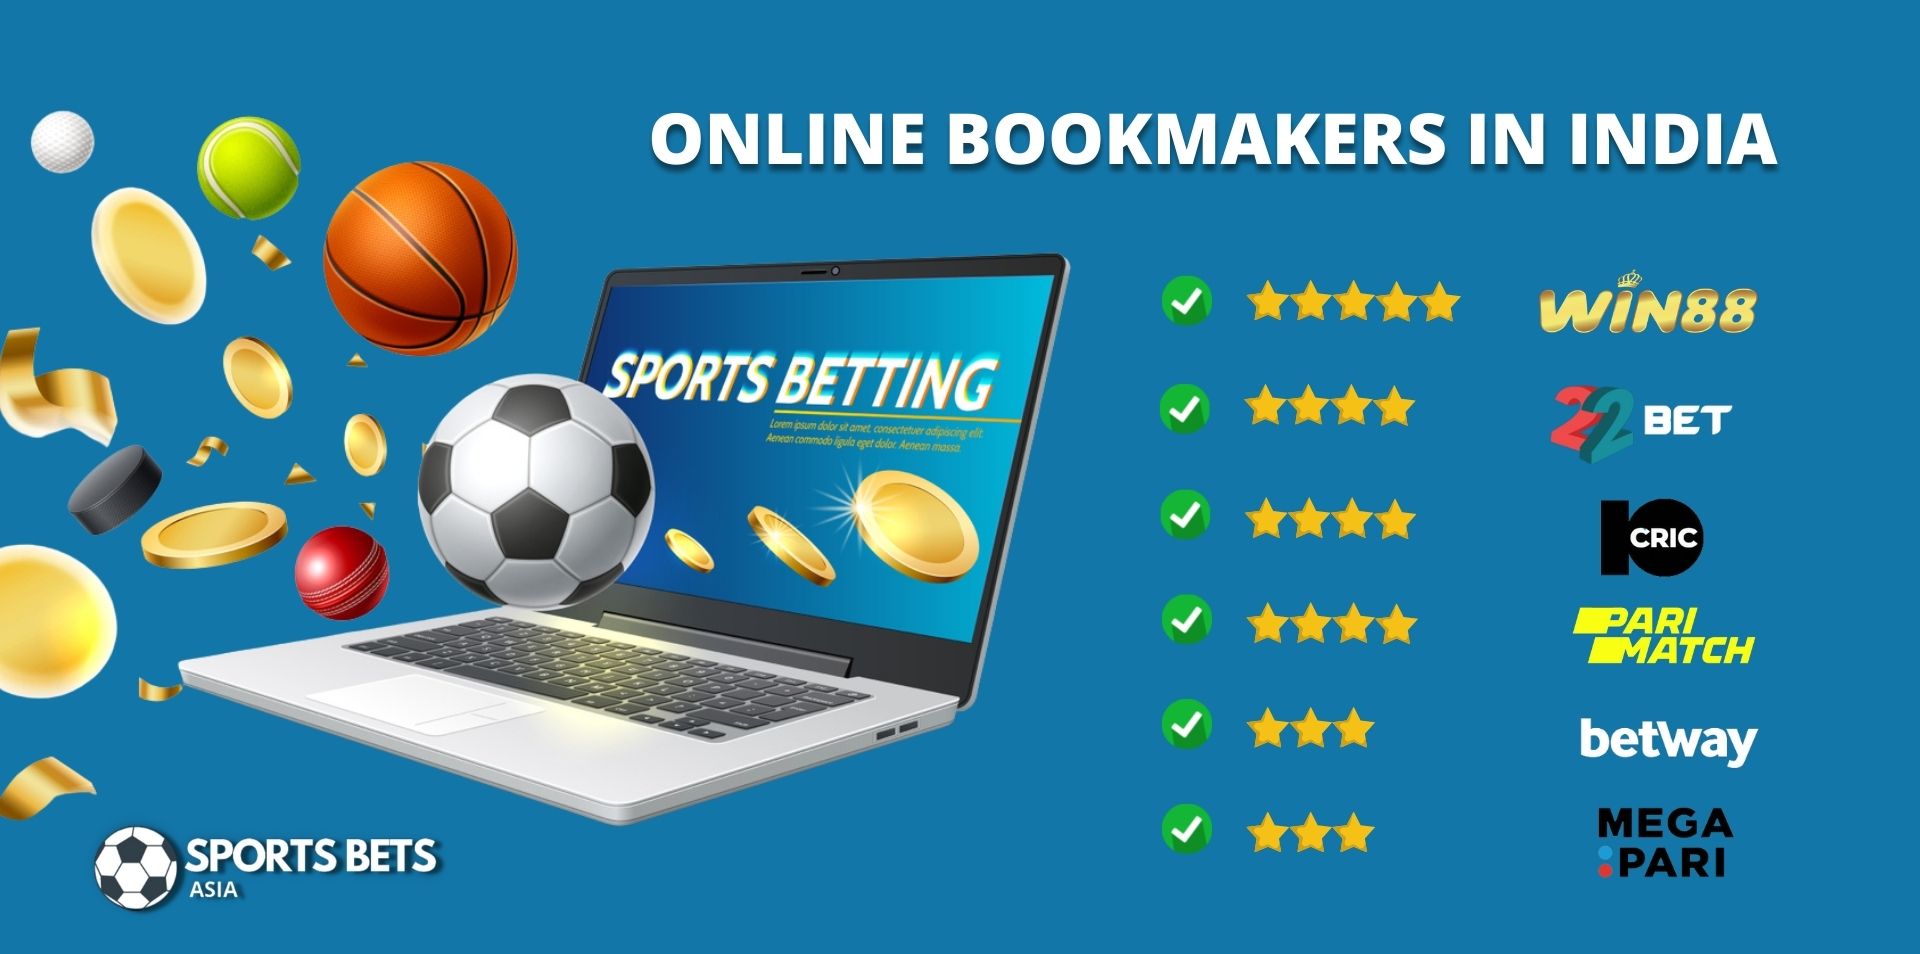 Online Bookmakers in India